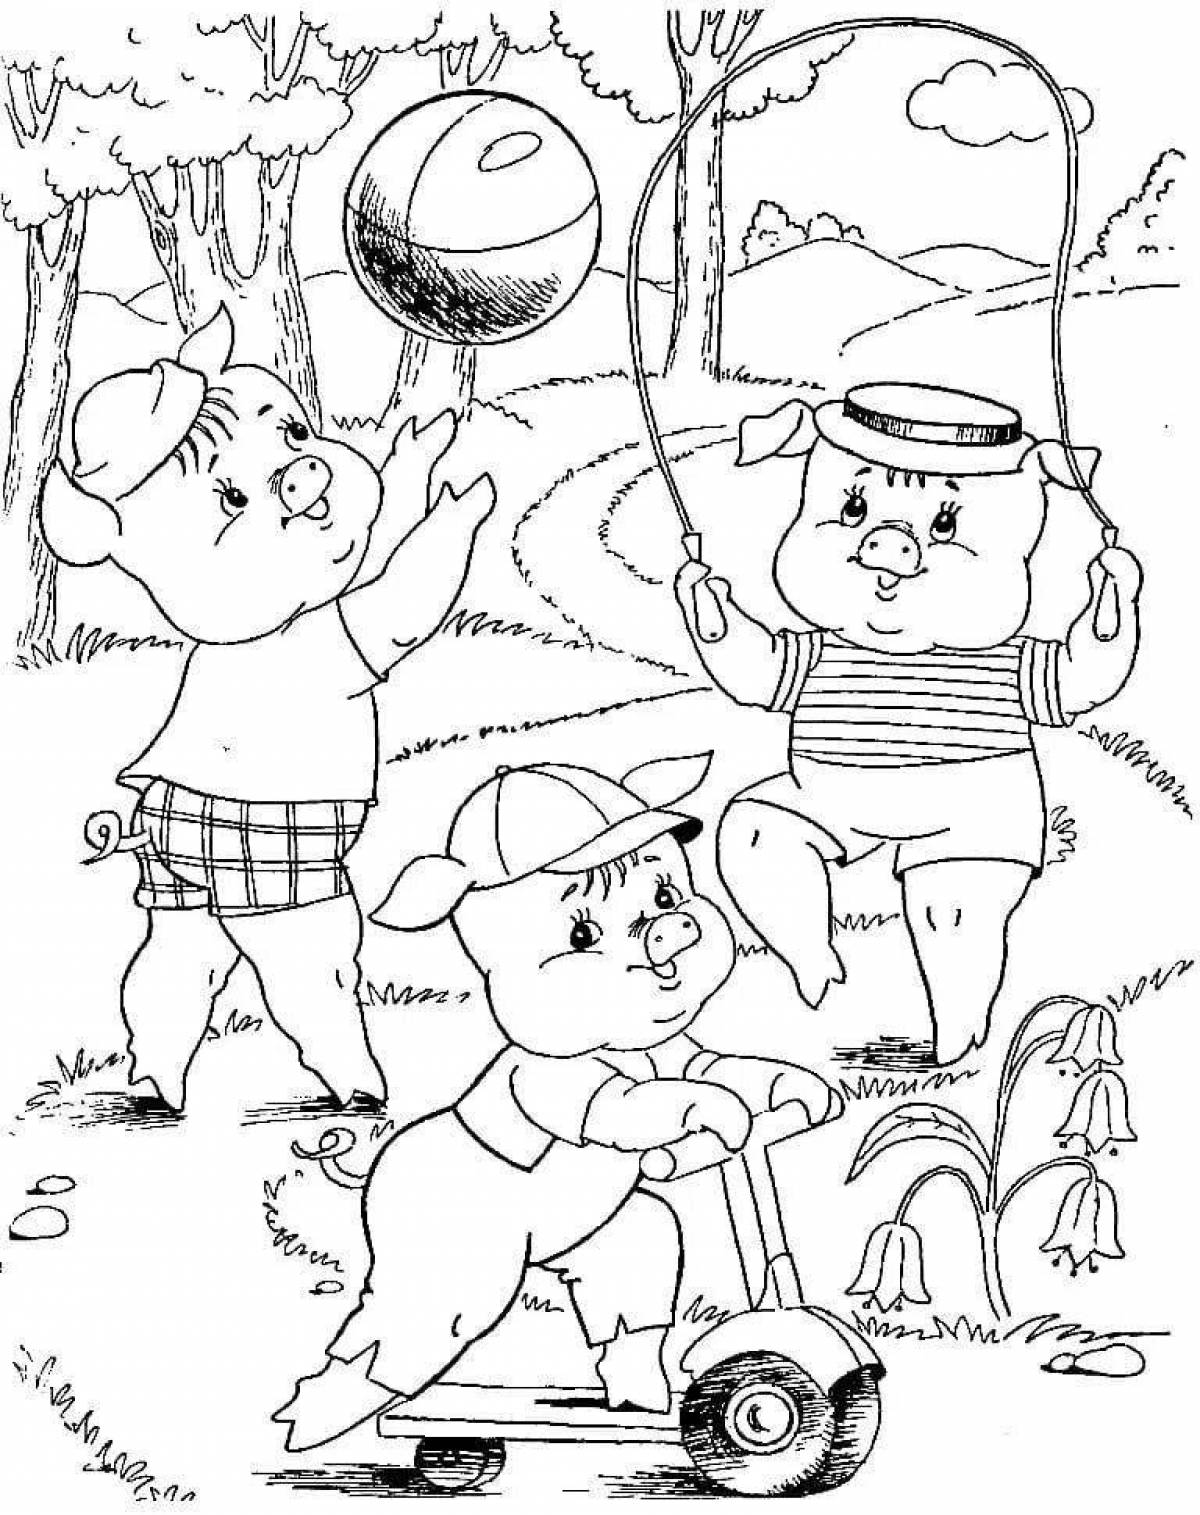 Colorful 3 Little Pigs coloring page